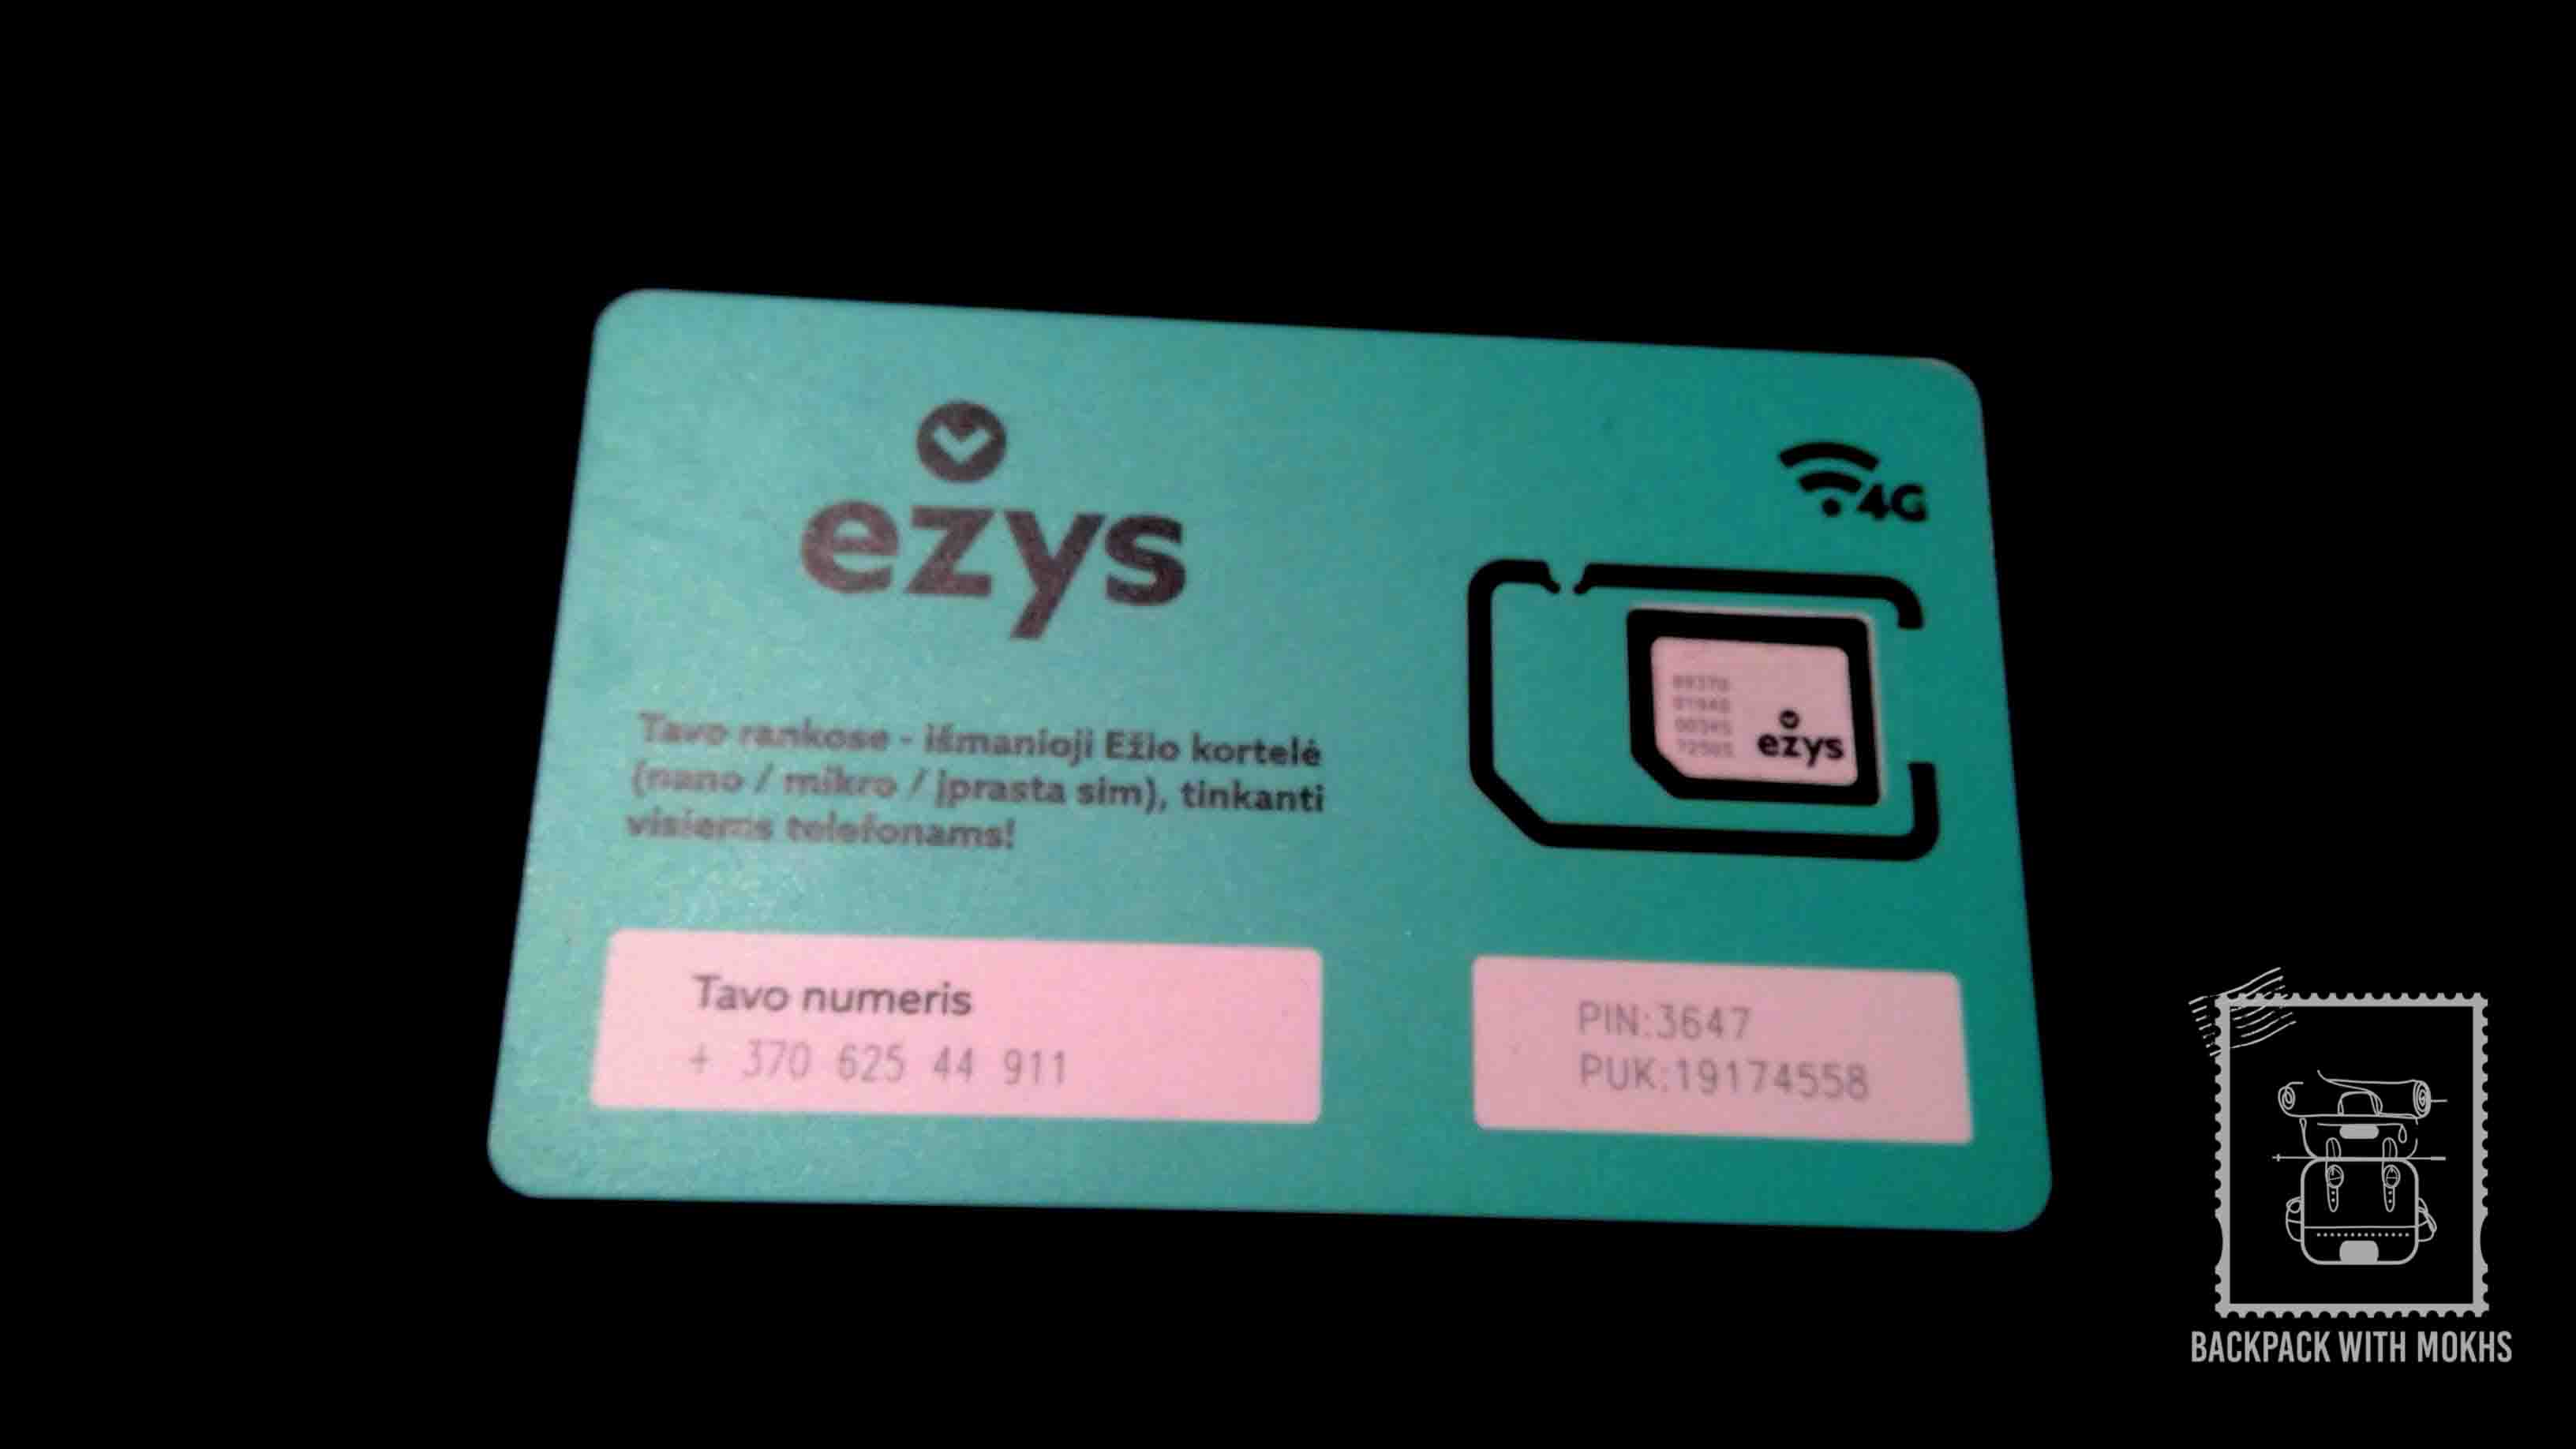 Phone cards in Lithuania